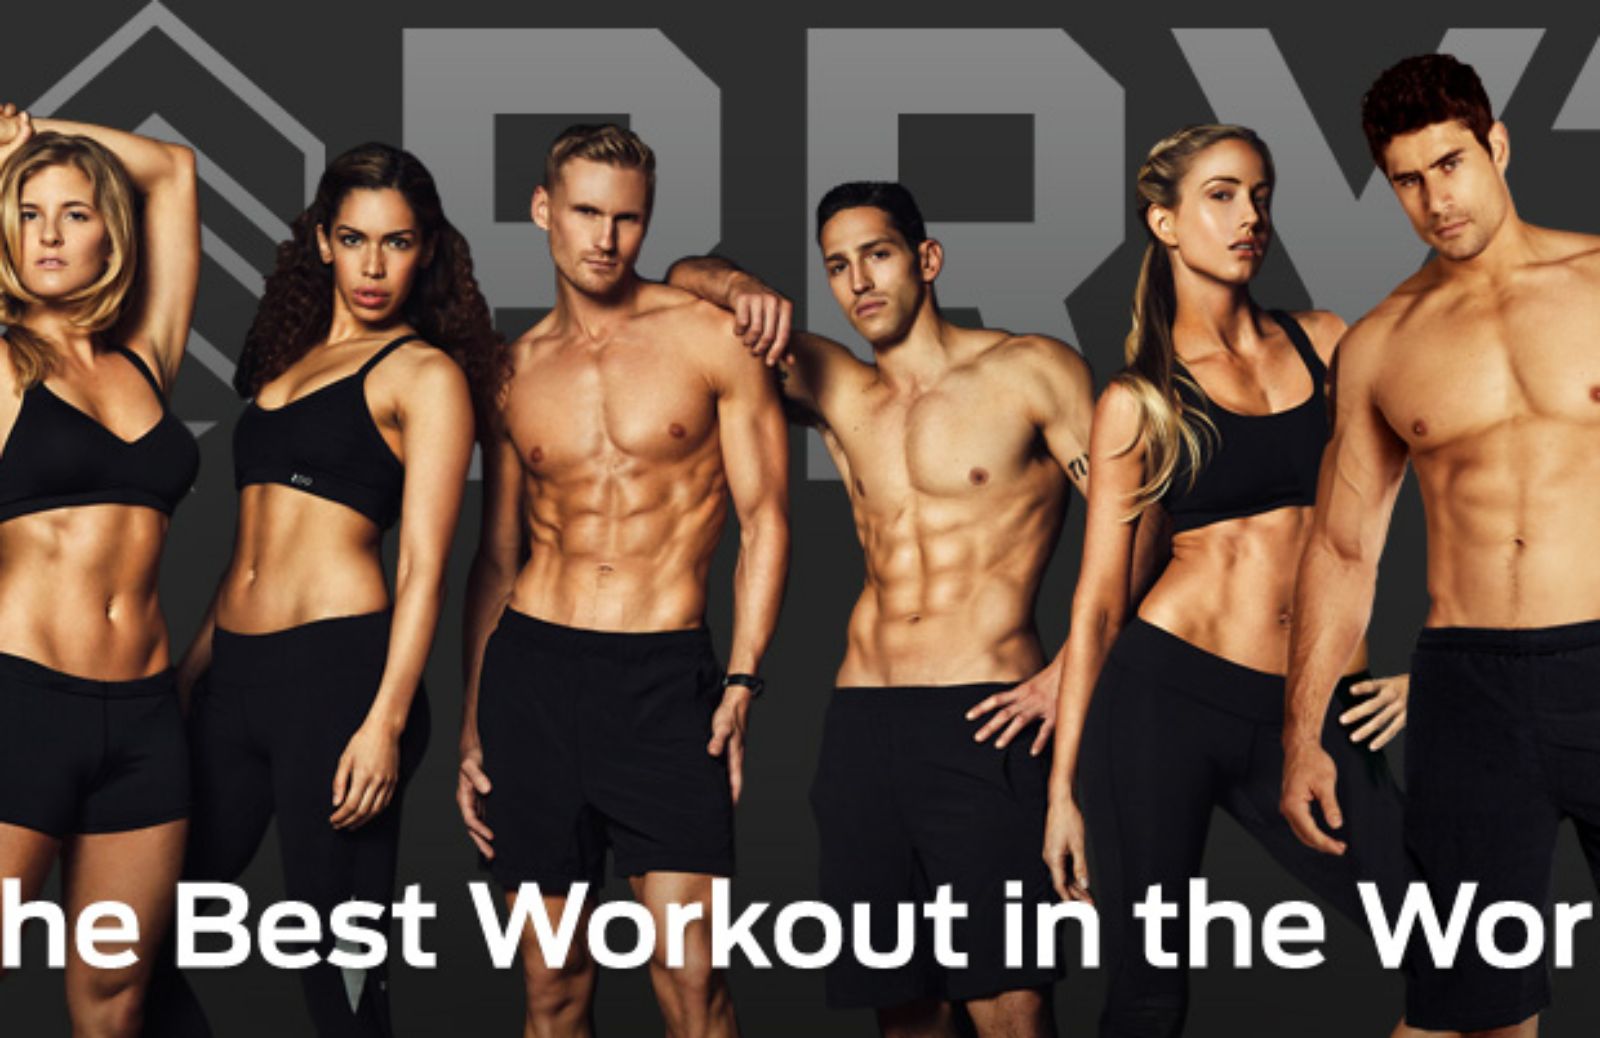 Barry's bootcamp: interval workout 12 minuti